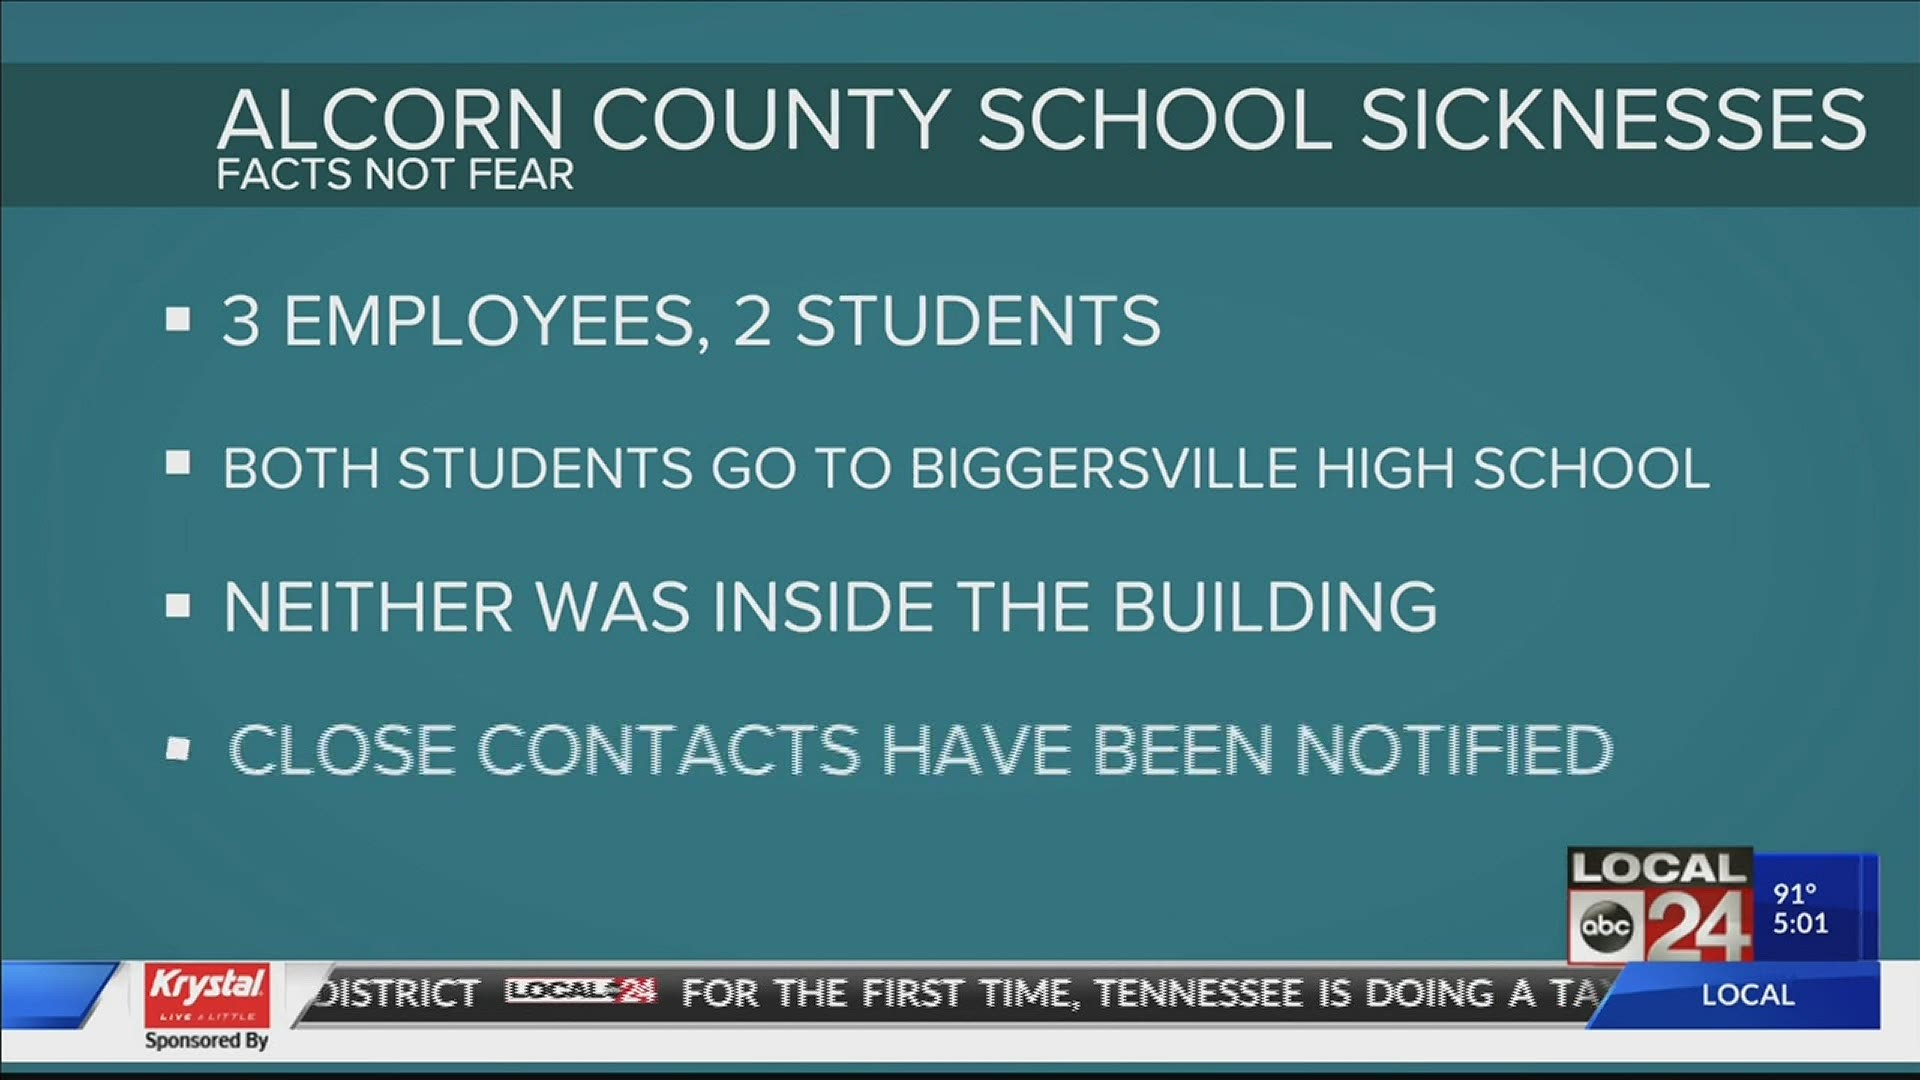 Cases have been reported in the same county, by both the Corinth School District and the Alcorn School District.